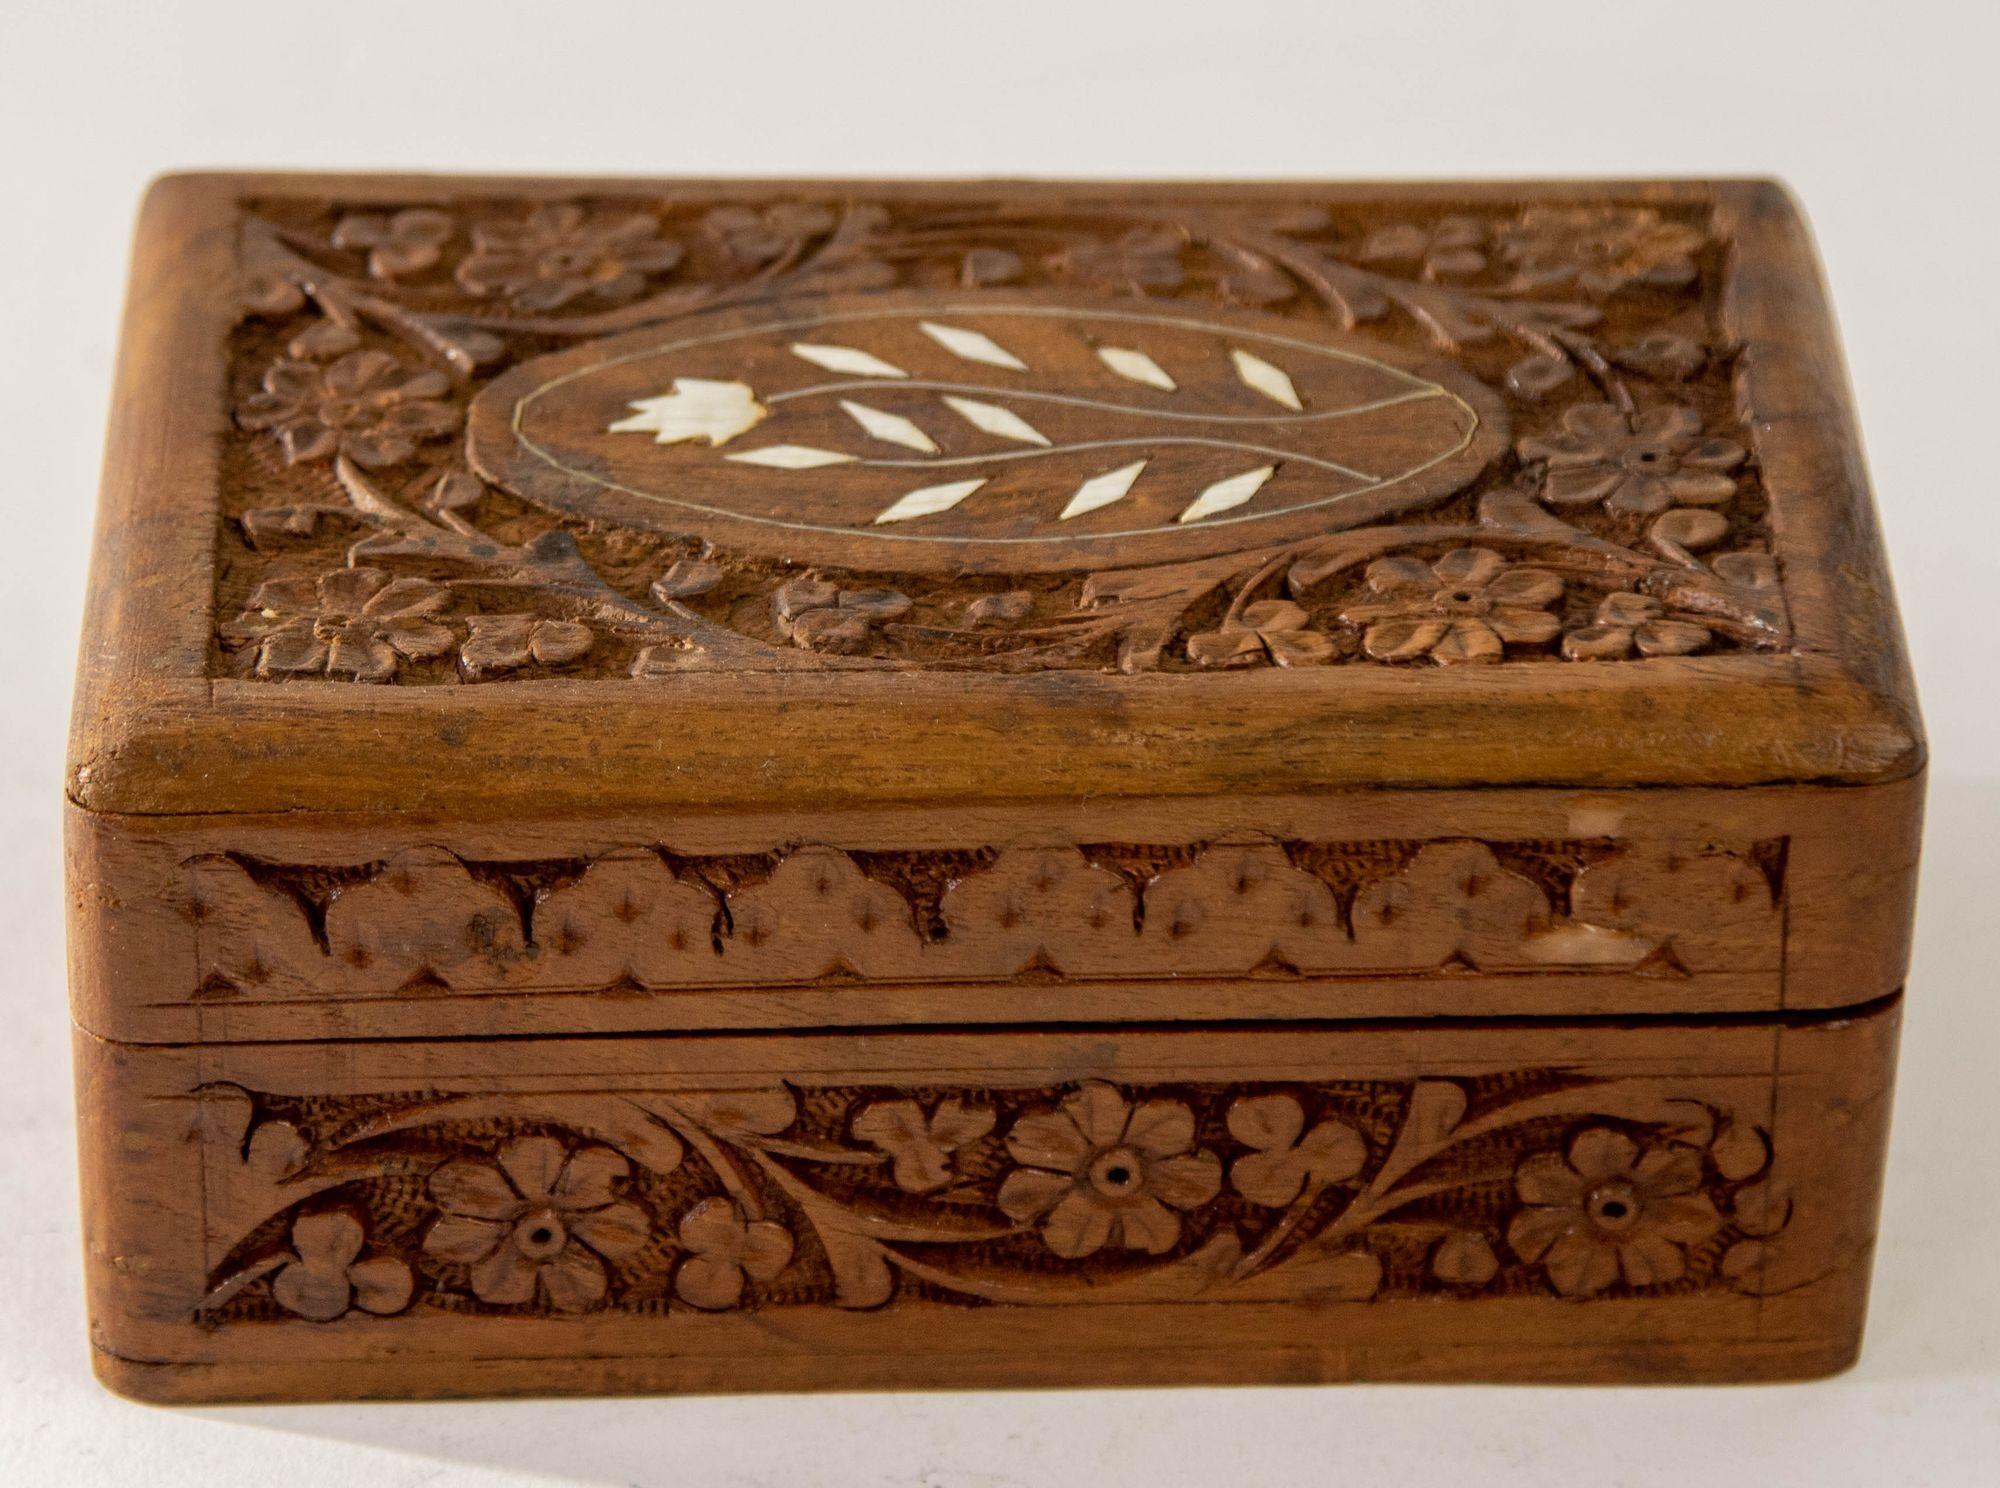 Vintage Traditional Carved Walnut Bone Inlaid Storage Jewelry Box.
Kashmiri hand carved trinket box with hinged lid shallow relief carving  and bone inlay with interior lined with blue velvet.
A beautifully hand-carved jewelry box made with